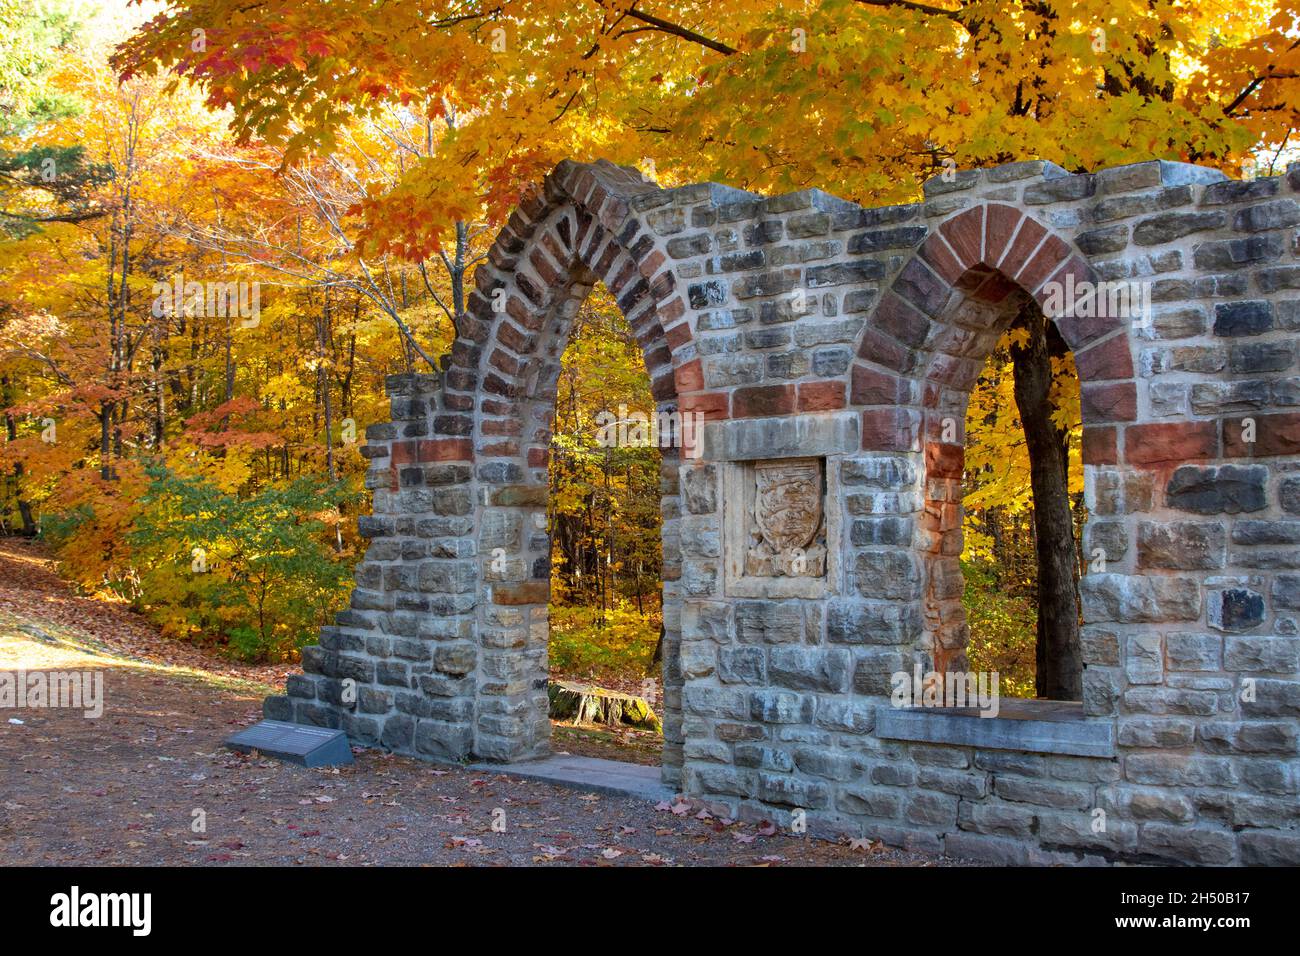 Walls of abbey ruins in autumn with yellow and orange leaves. Mackenzie King Estate, Gatineau Park, Quebec, Canada. Stock Photo